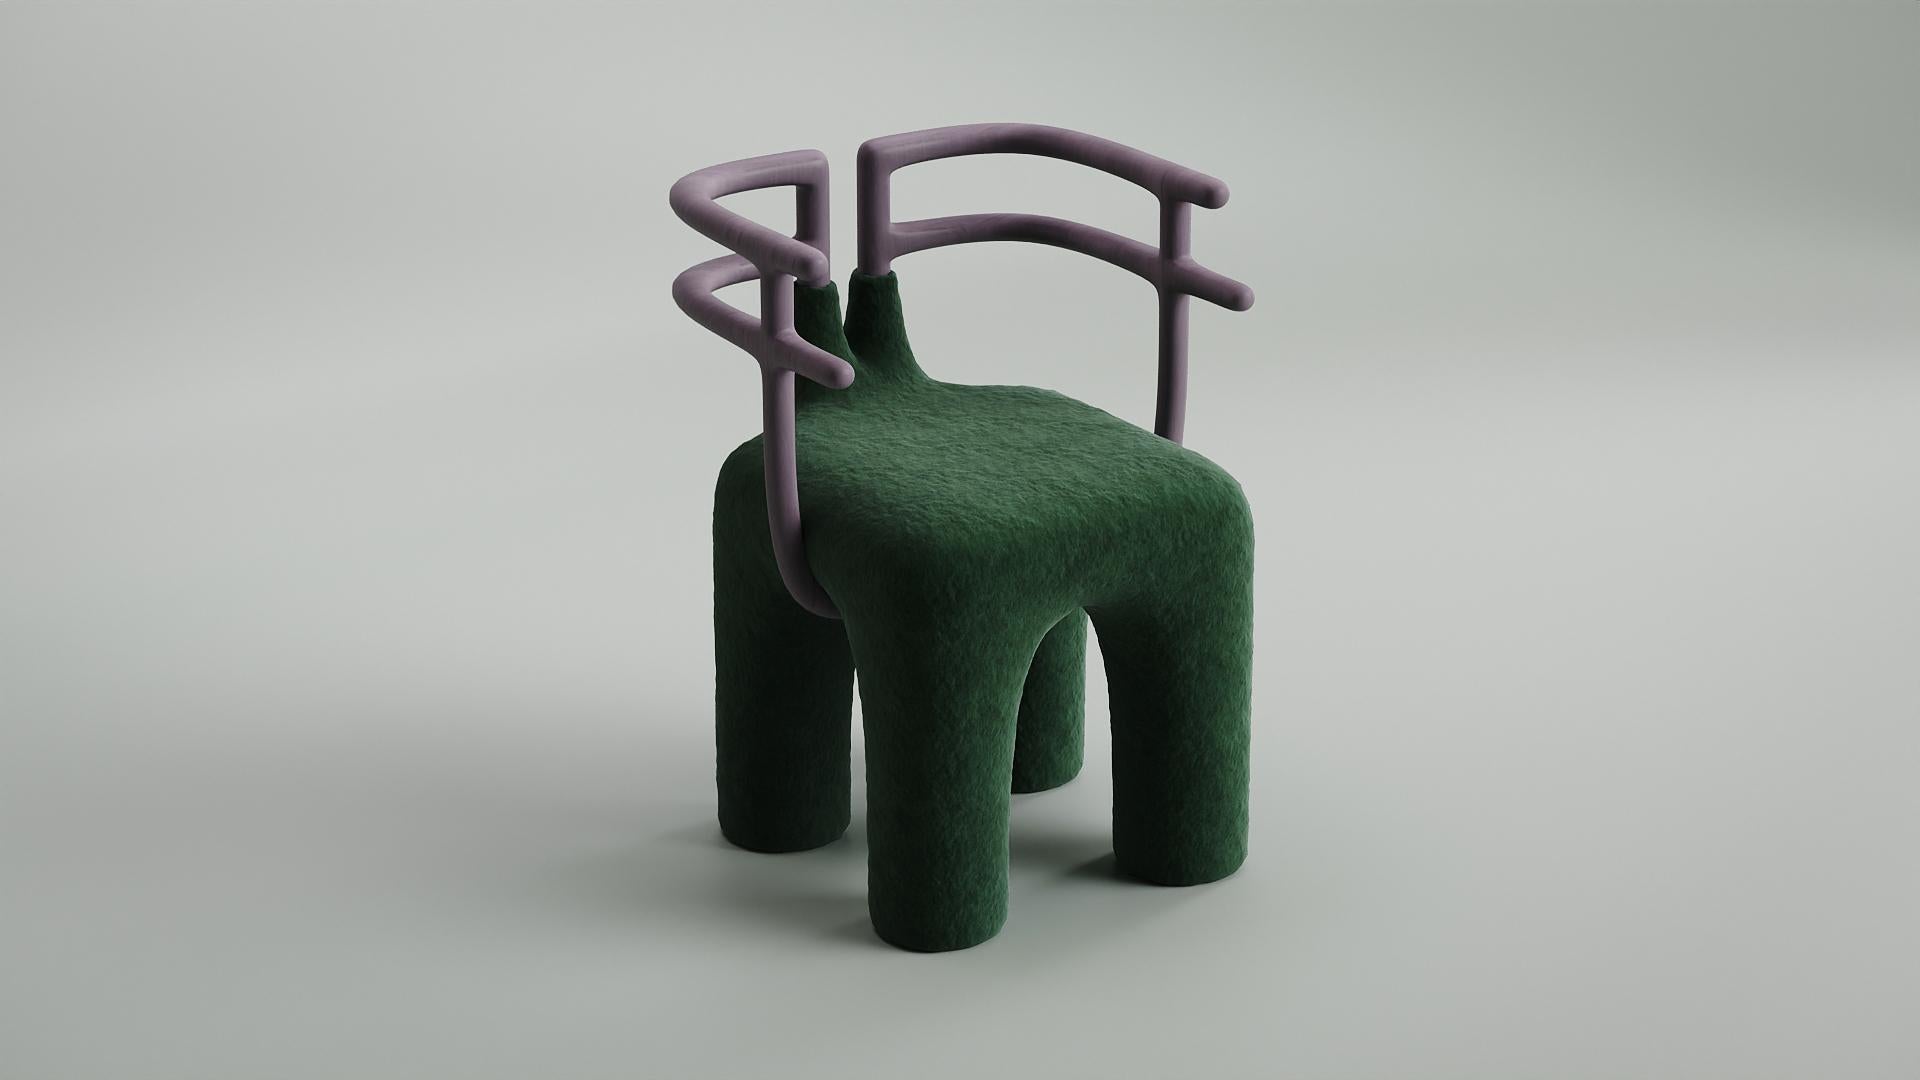 Non Hunting Time Chair by Taras Yoom
Limited Edition of 30
Dimensions: D 40 x W 45 x H 60 cm
Materials: Wood, metal, felt, PU.

Chair «Non hunting time» consists of a wooden base with soft fabric upholstery and a wooden chairback in the form of